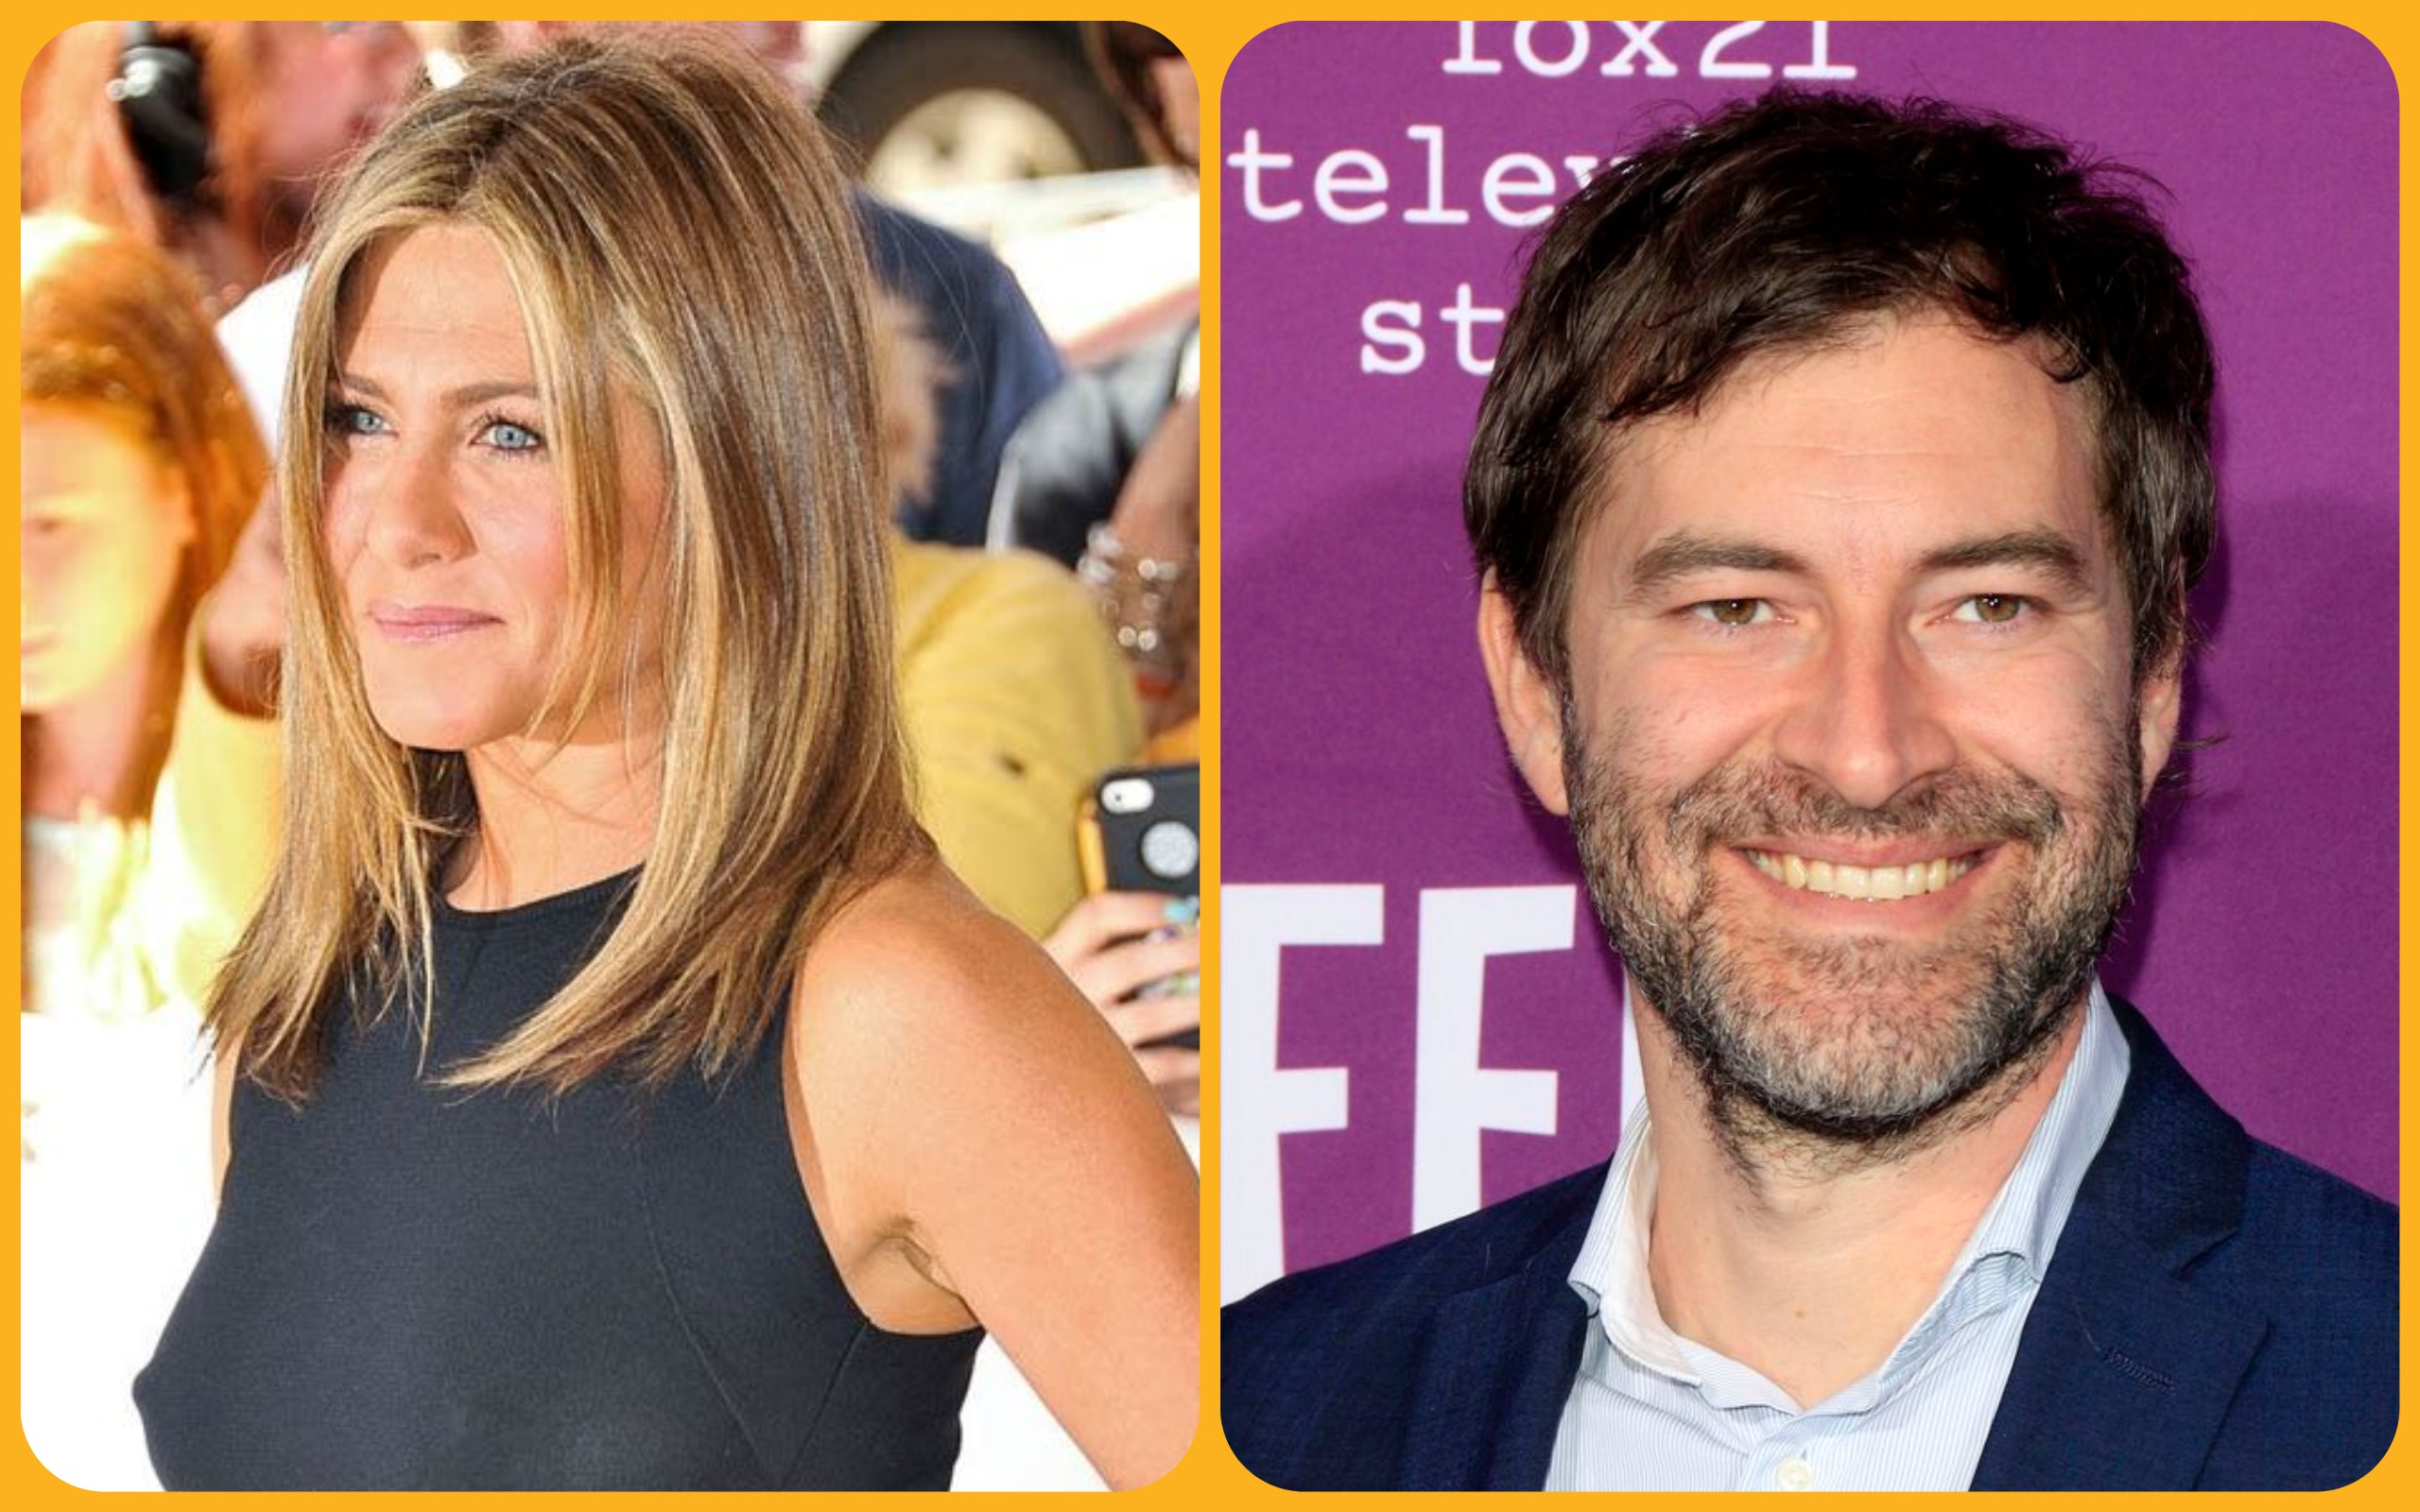 Jennifer Aniston is not keeping her Morning Show costar Mark Duplass at arm's length because she's wary of his wife, despite reports.